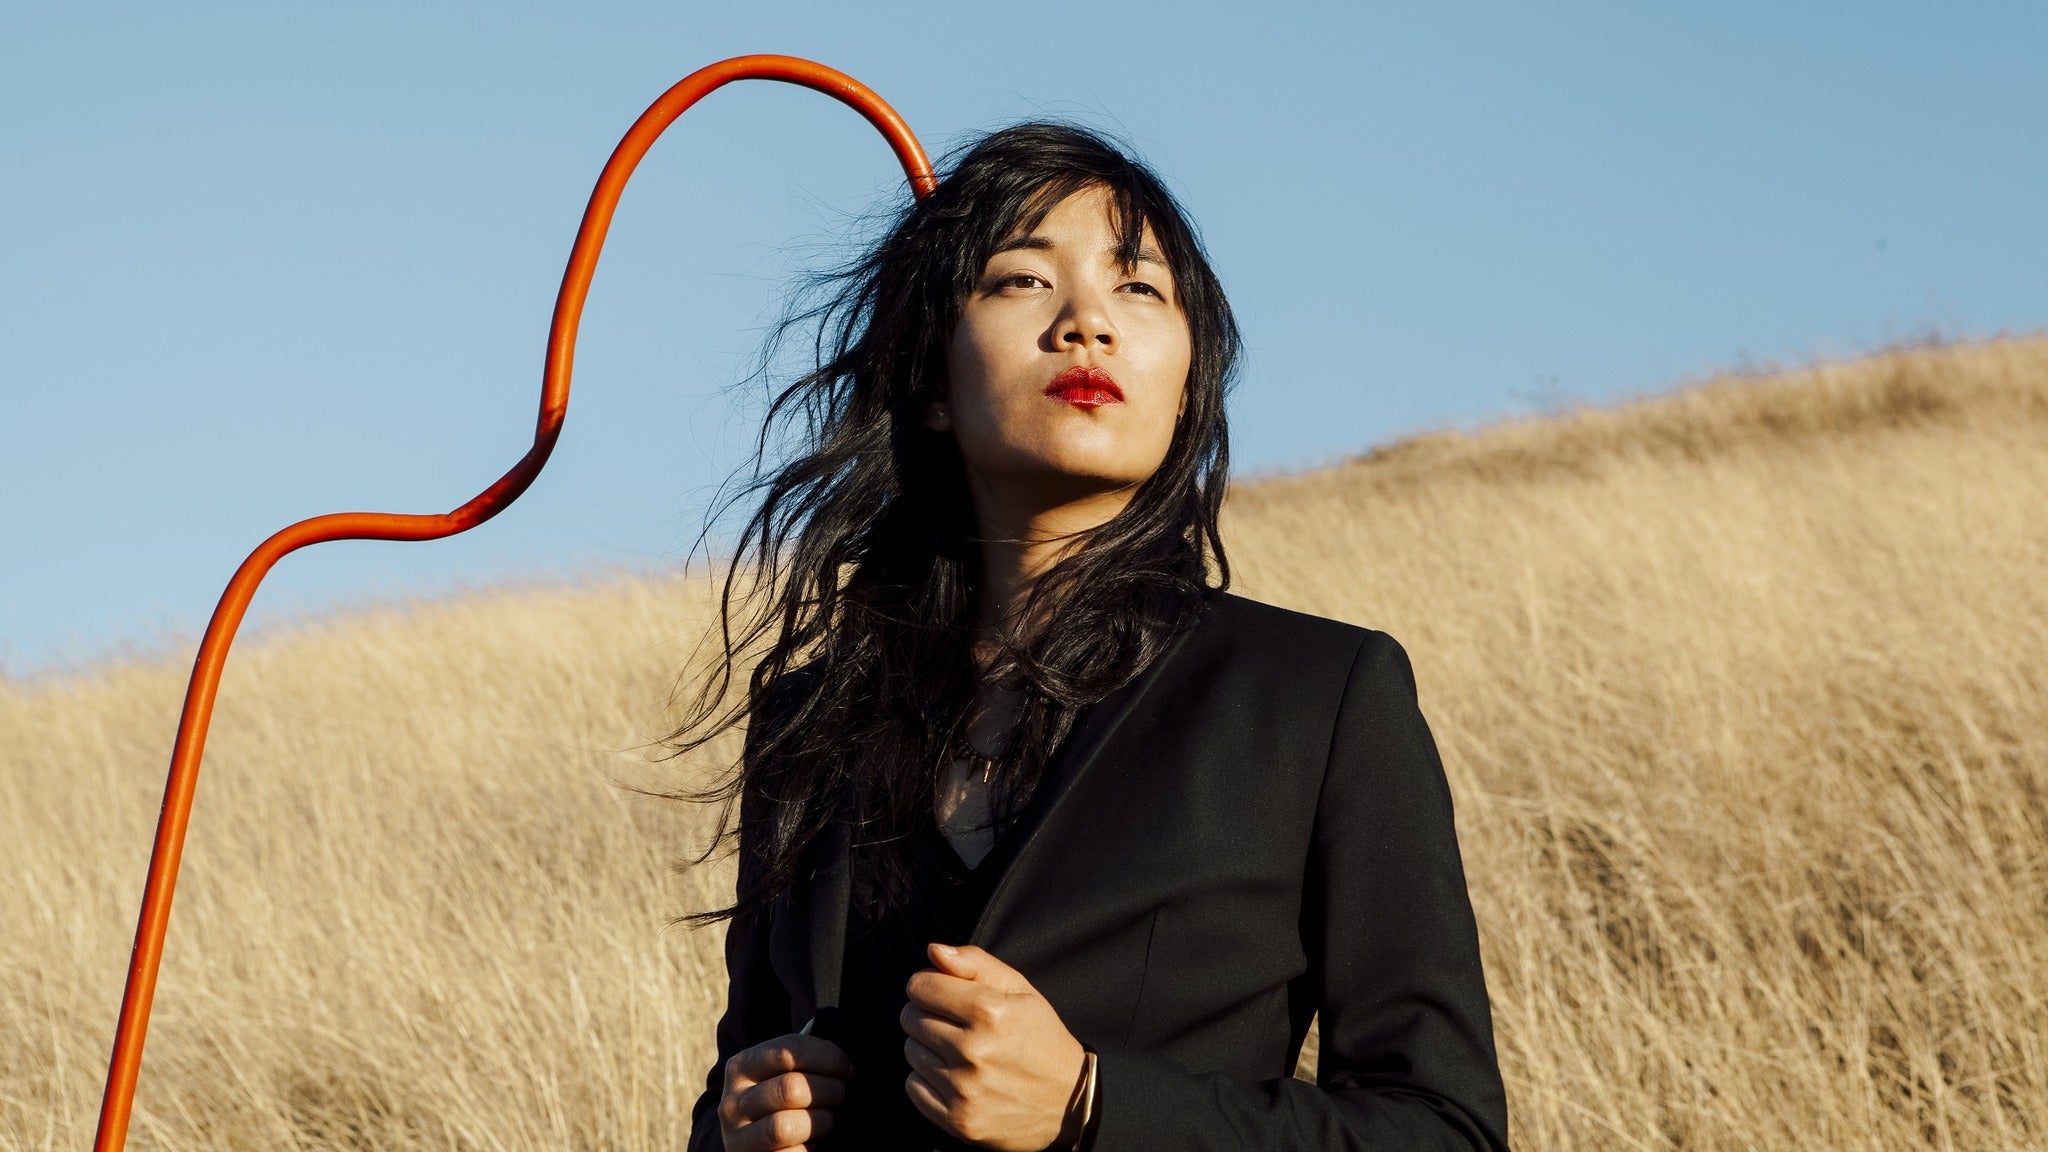 Thao & The Get Down Stay Down in New York promo photo for Artist presale offer code